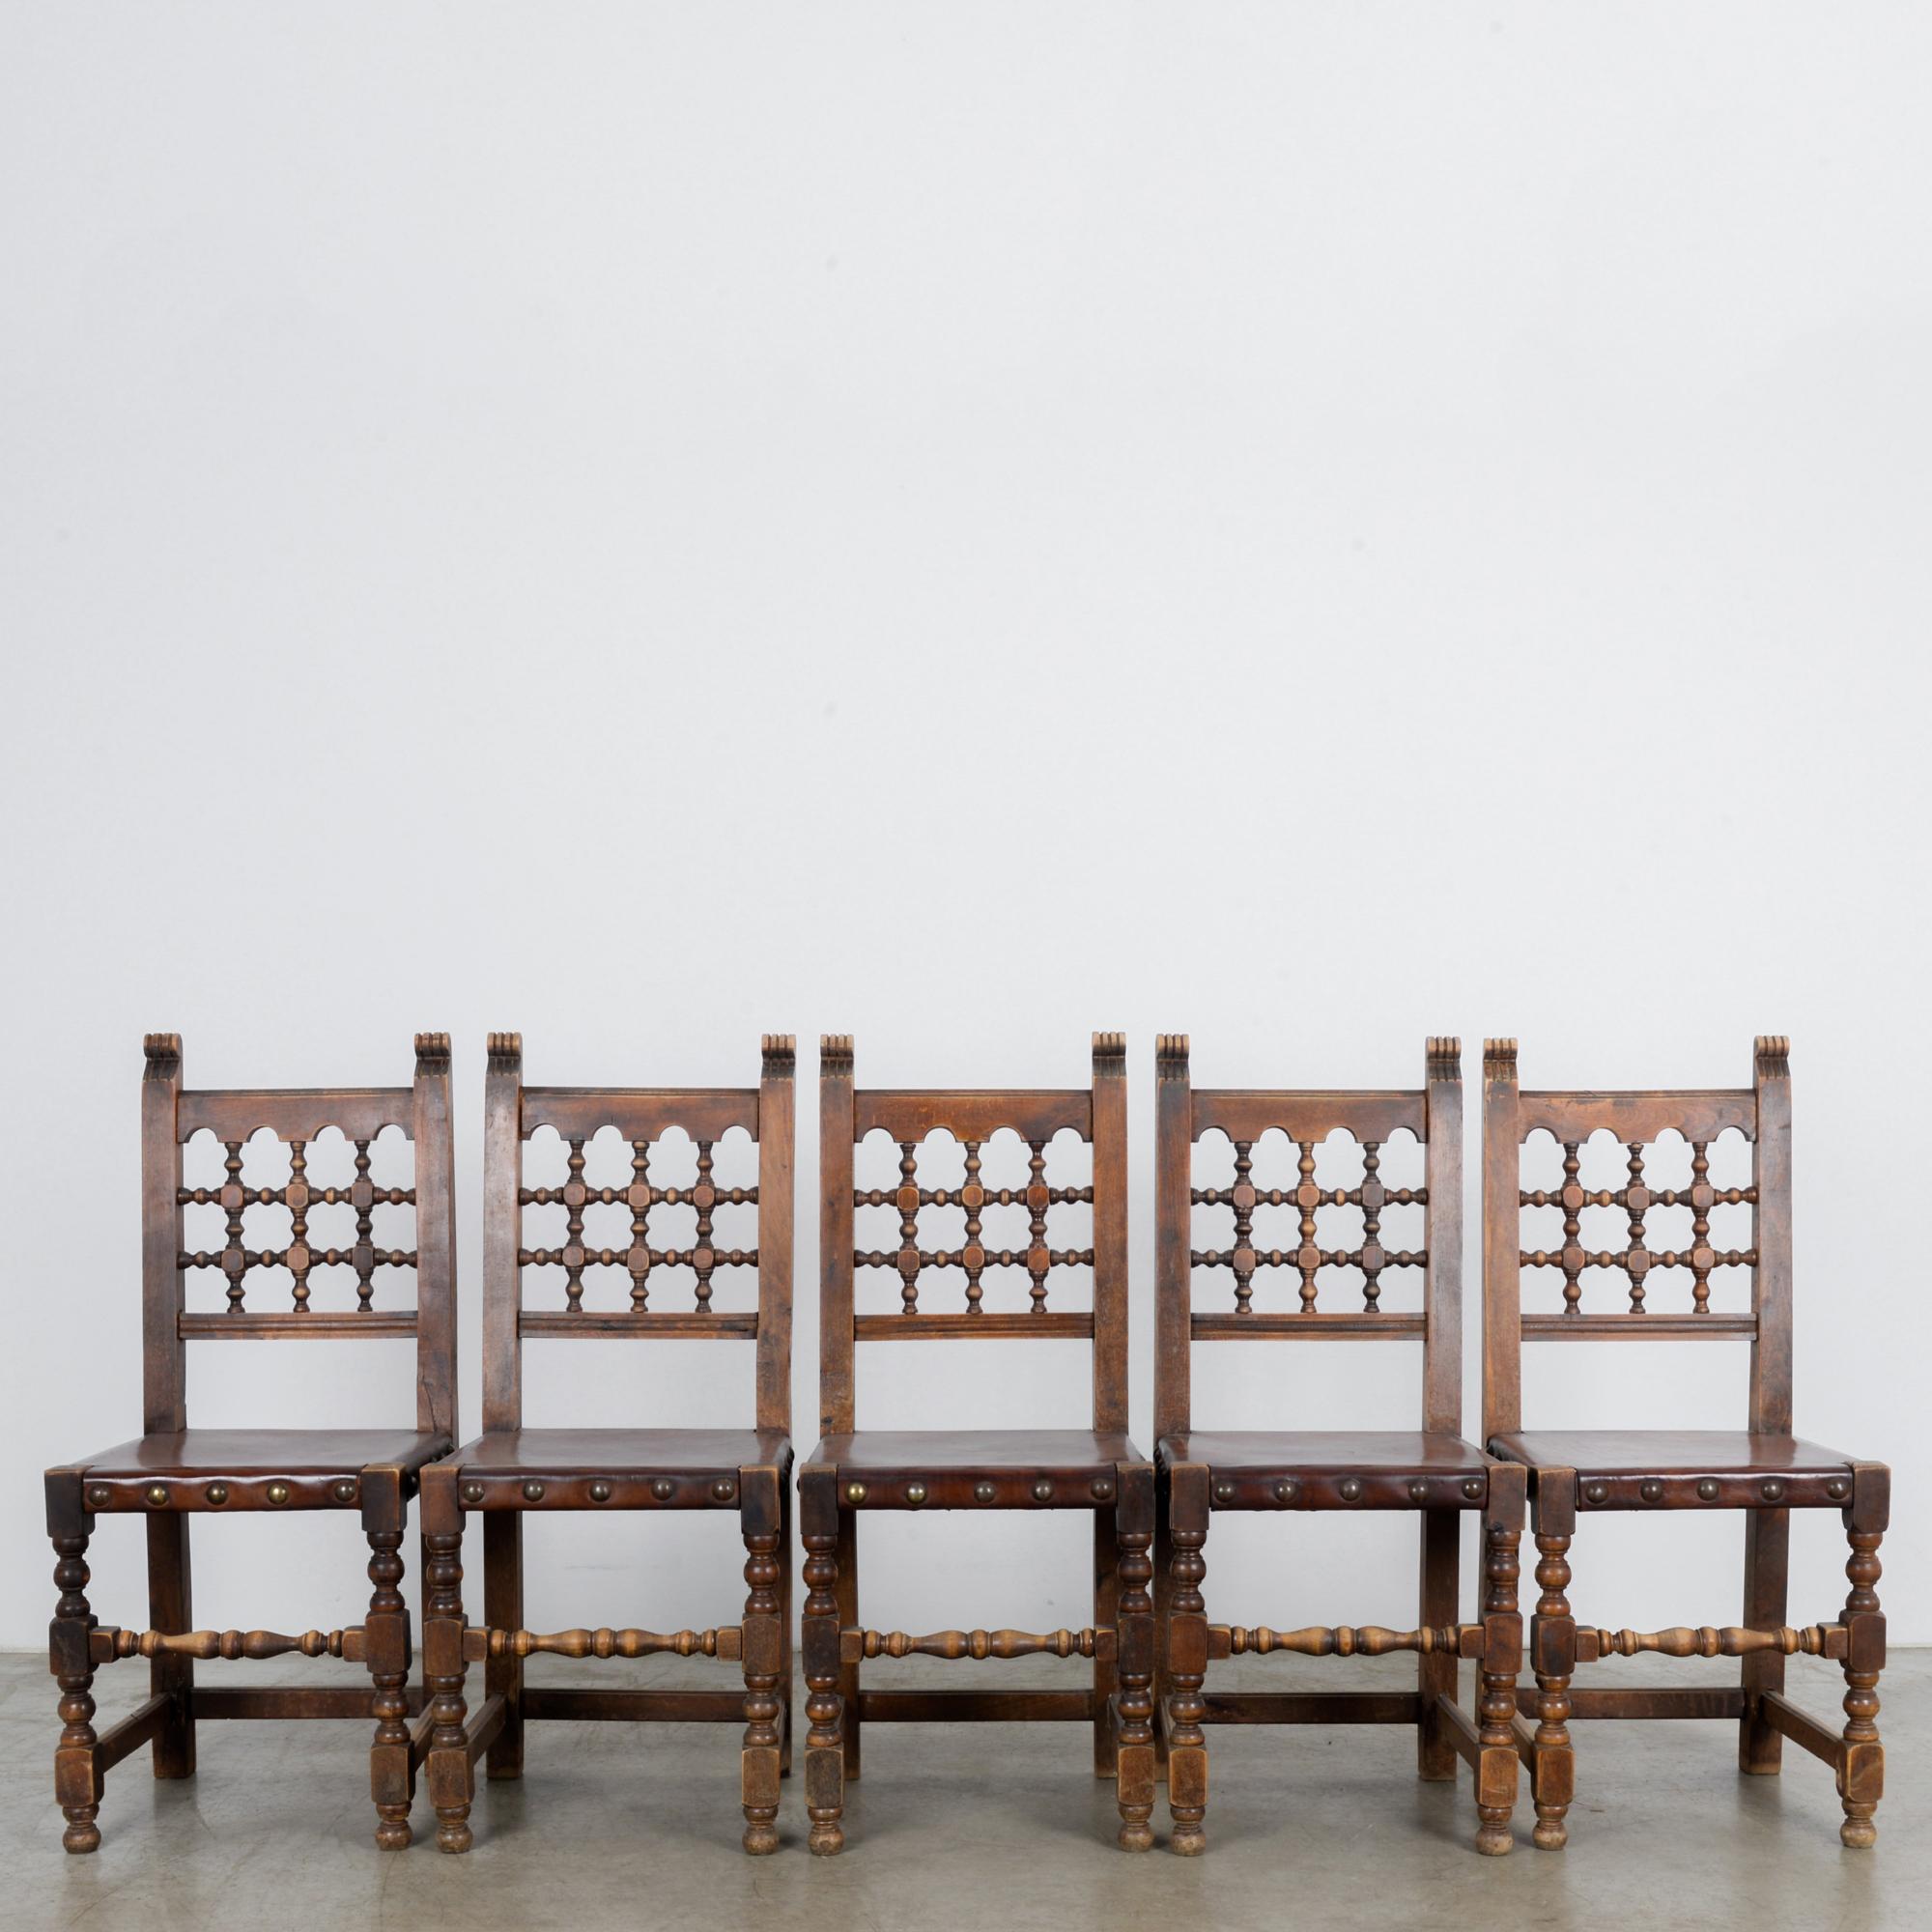 A set of five wooden dining chairs with leather seats from Belgium, circa 1960. Hearty, dark wood forms a straight outline for this contemporary take on Tudor style seating. Fine craftsmanship in the carving of the seat backs into quipu like grids